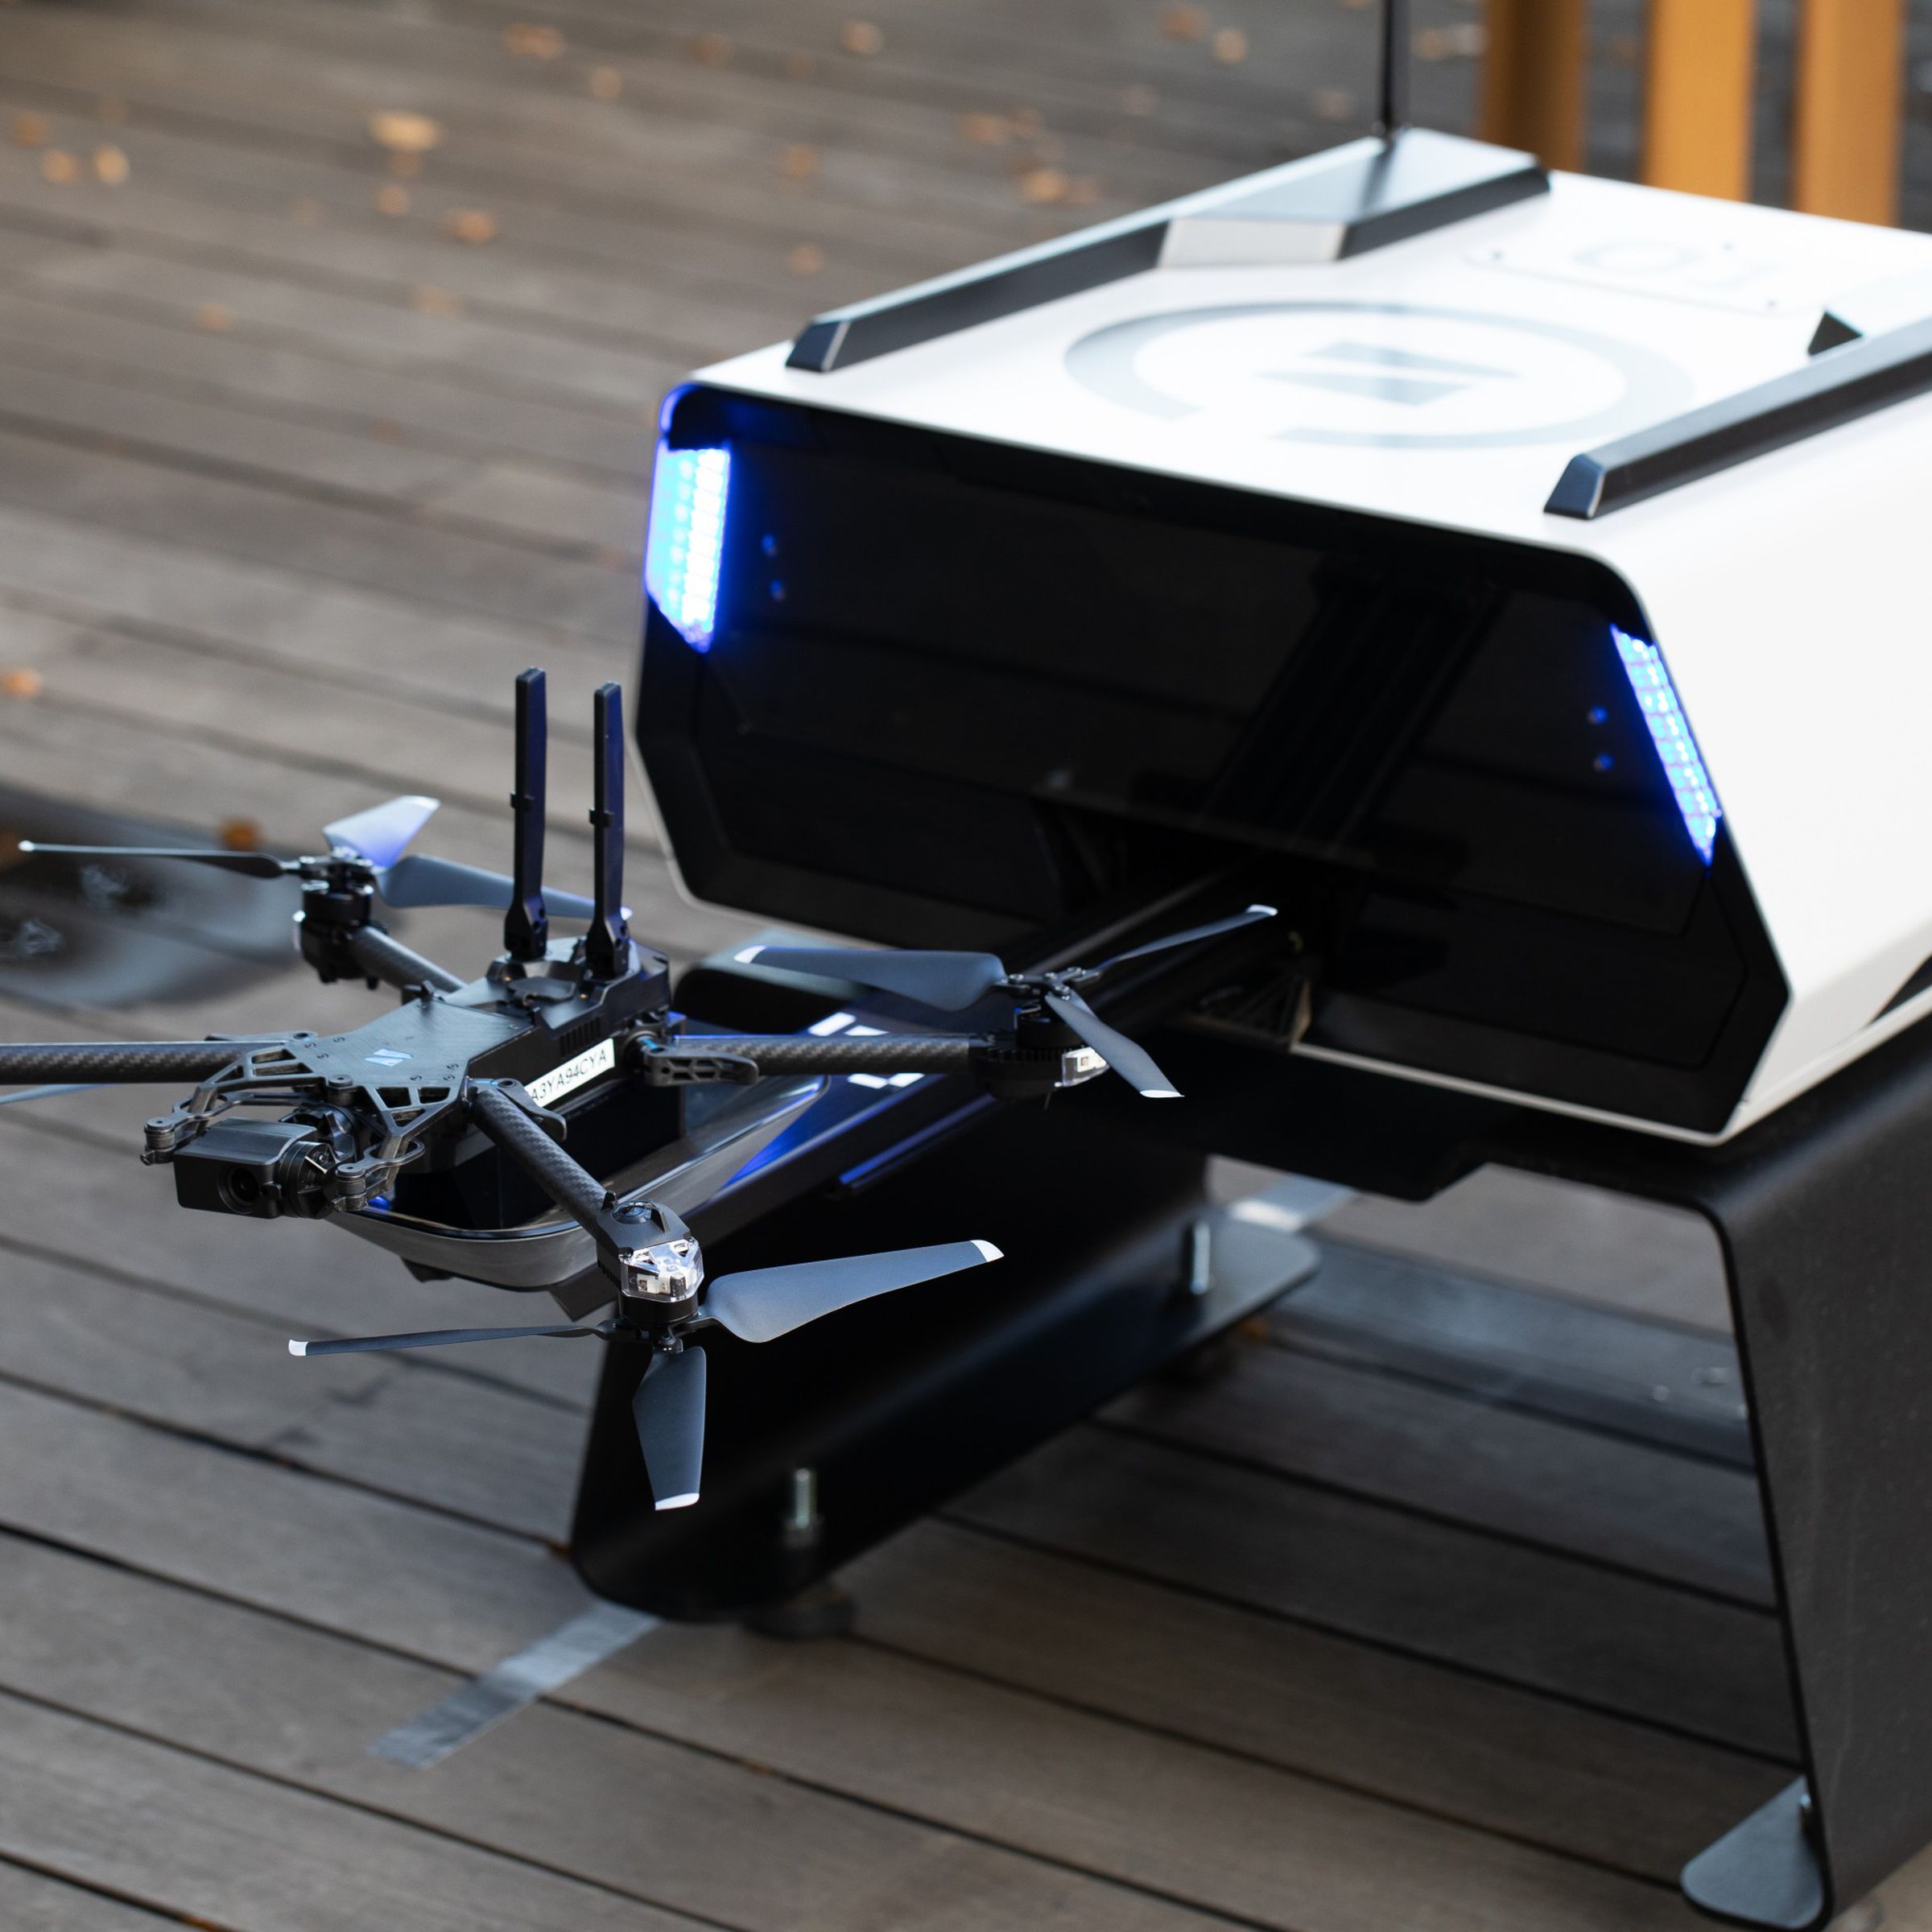 The Skydio Dock with a Skydio X2 drone.